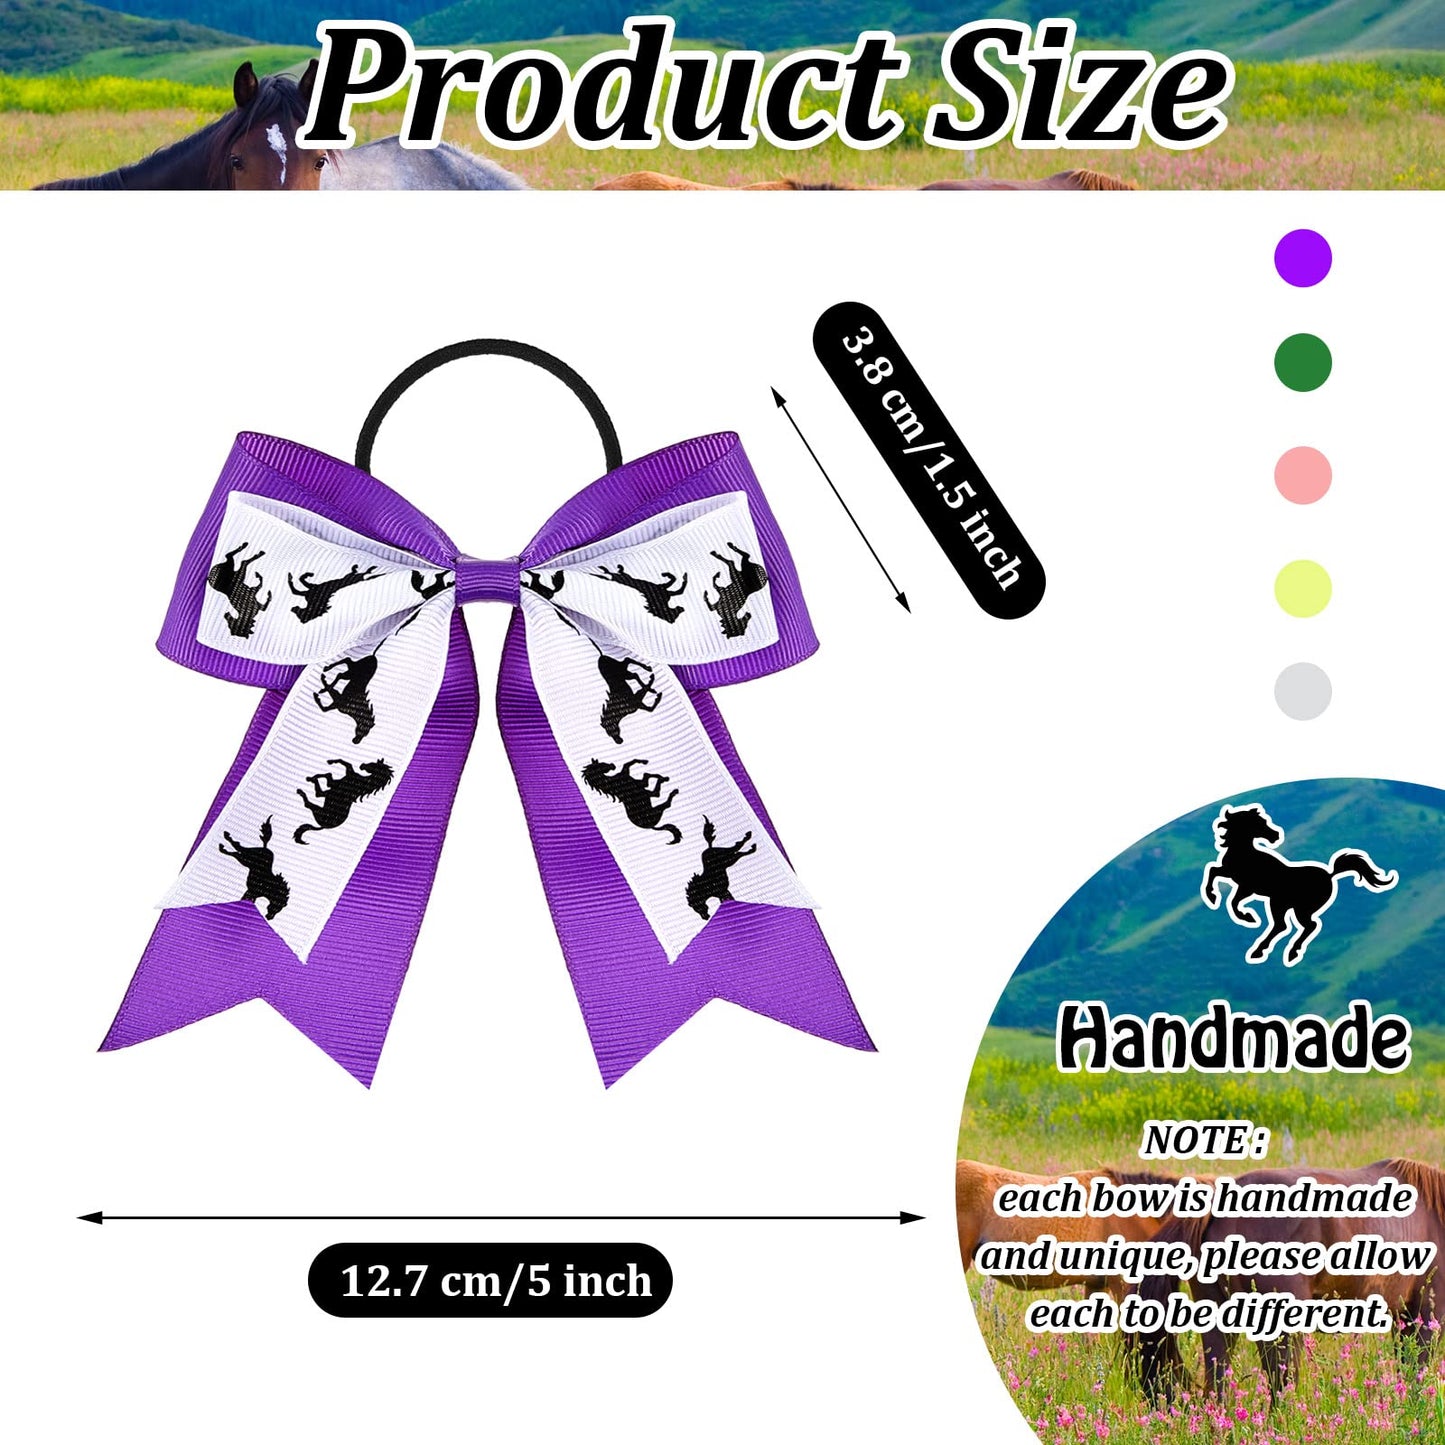 10 Pieces Horse Hair Accessories Horse Hair Ties Multi Colored Hair Bows for Horse Shows Cowgirl Ribbon Tie Equestrian Hair Elastics No Crease Ponytail Holders